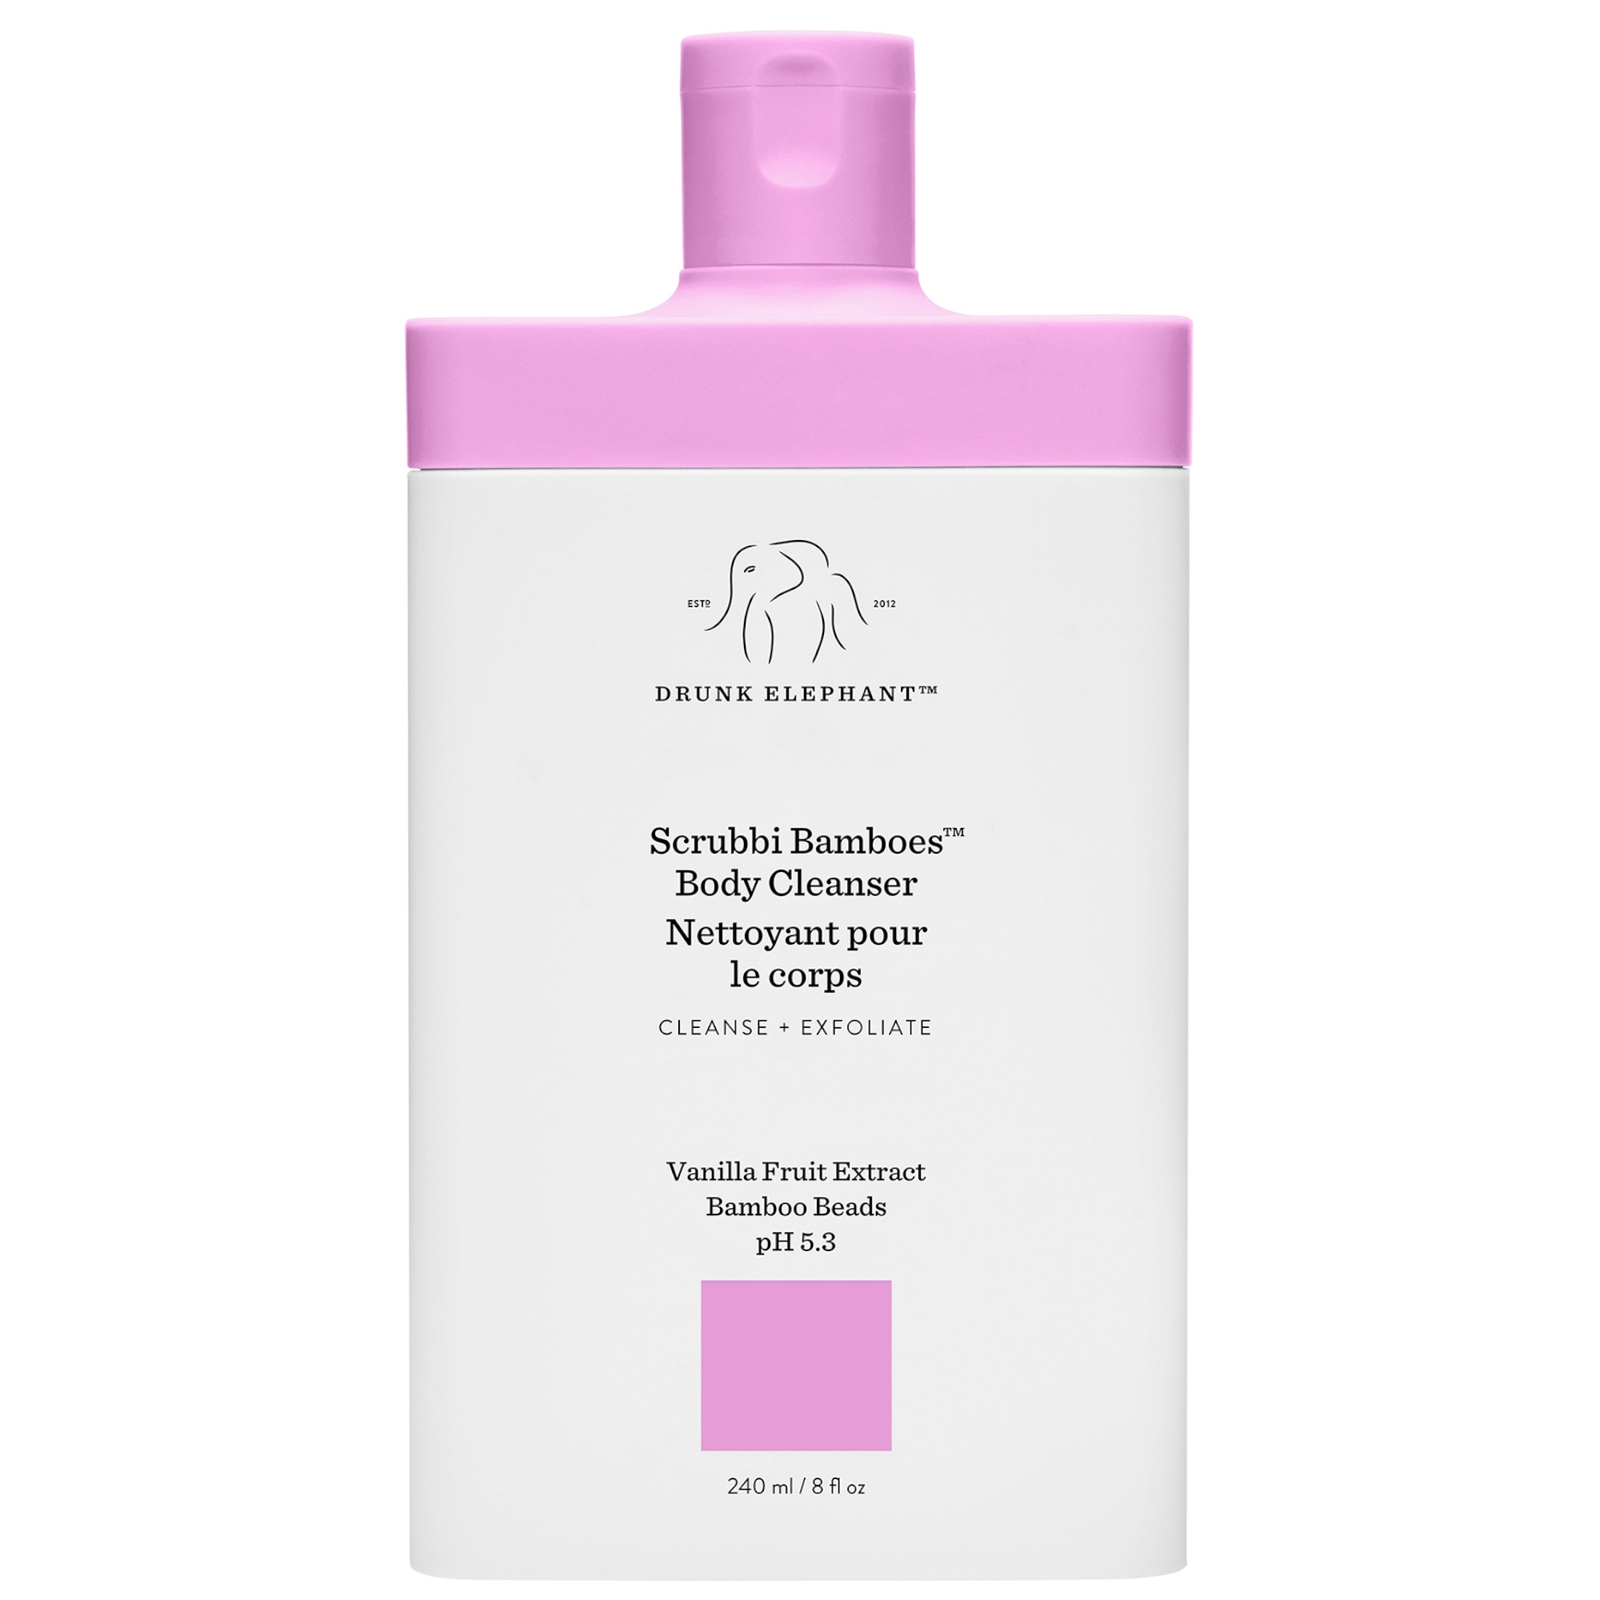 Photos - Facial / Body Cleansing Product Drunk Elephant Exclusive Scrubbi Bamboes Body Cleanser 240ml 42800701101